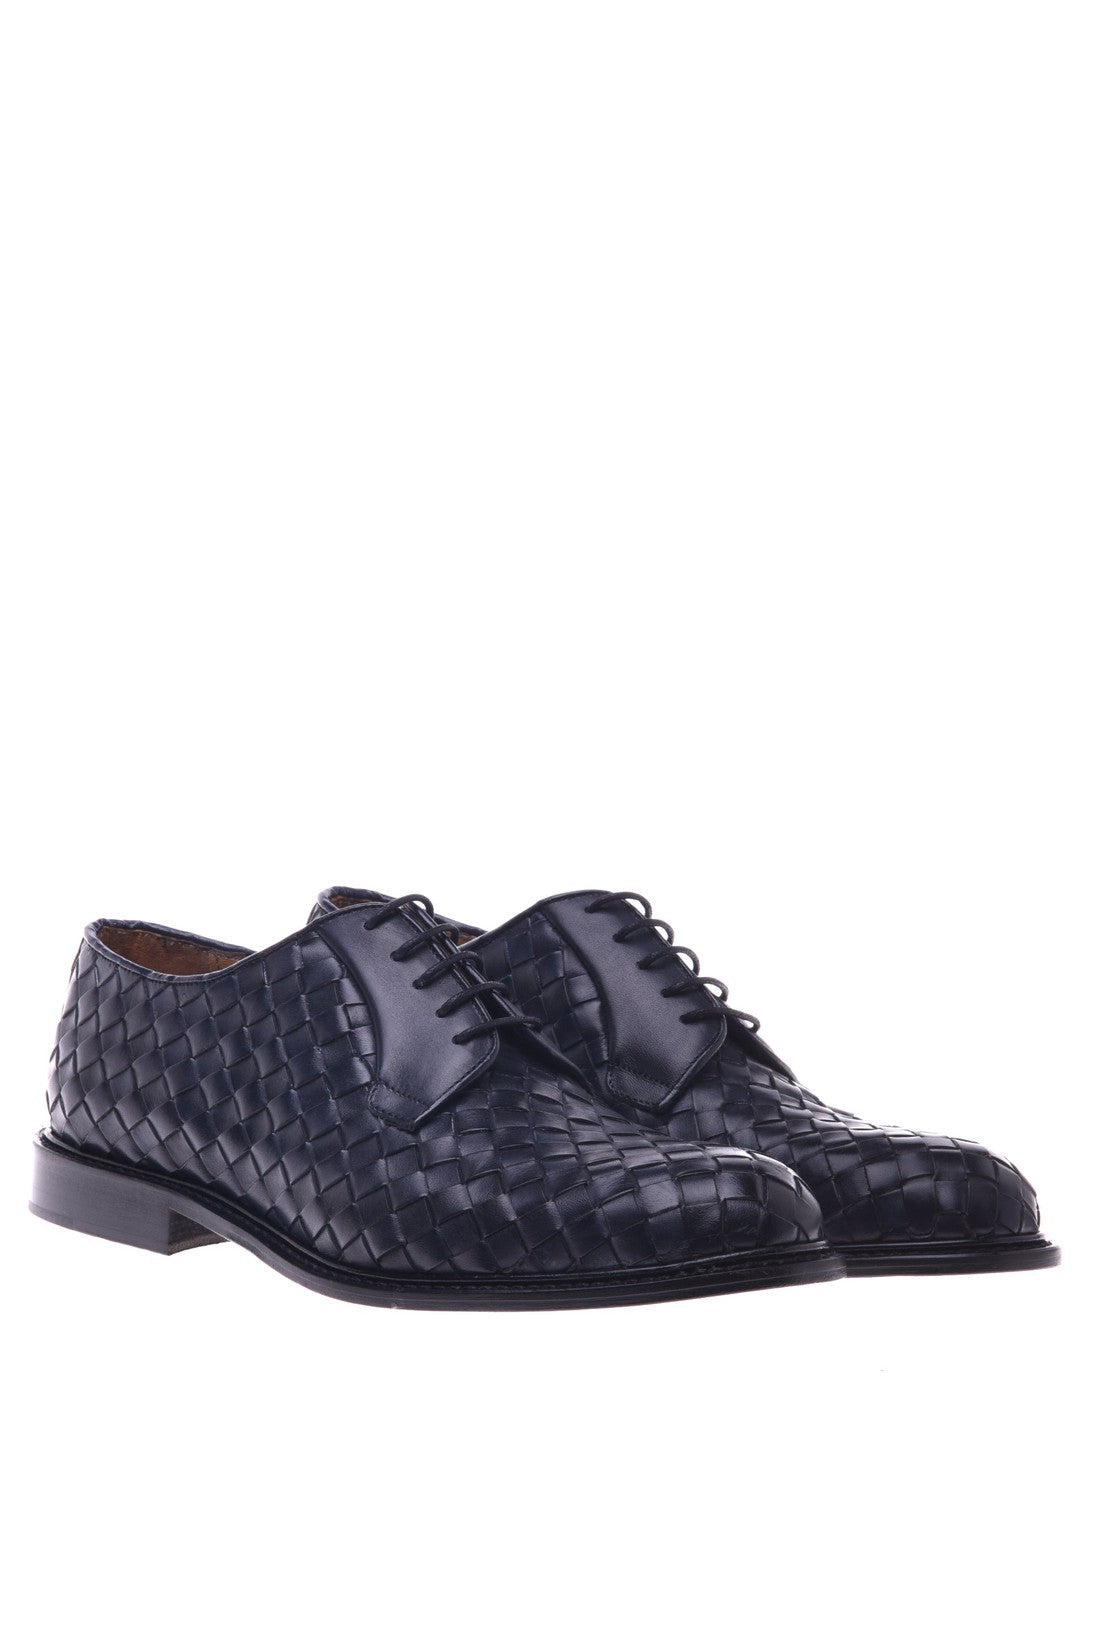 Blue woven leather derby